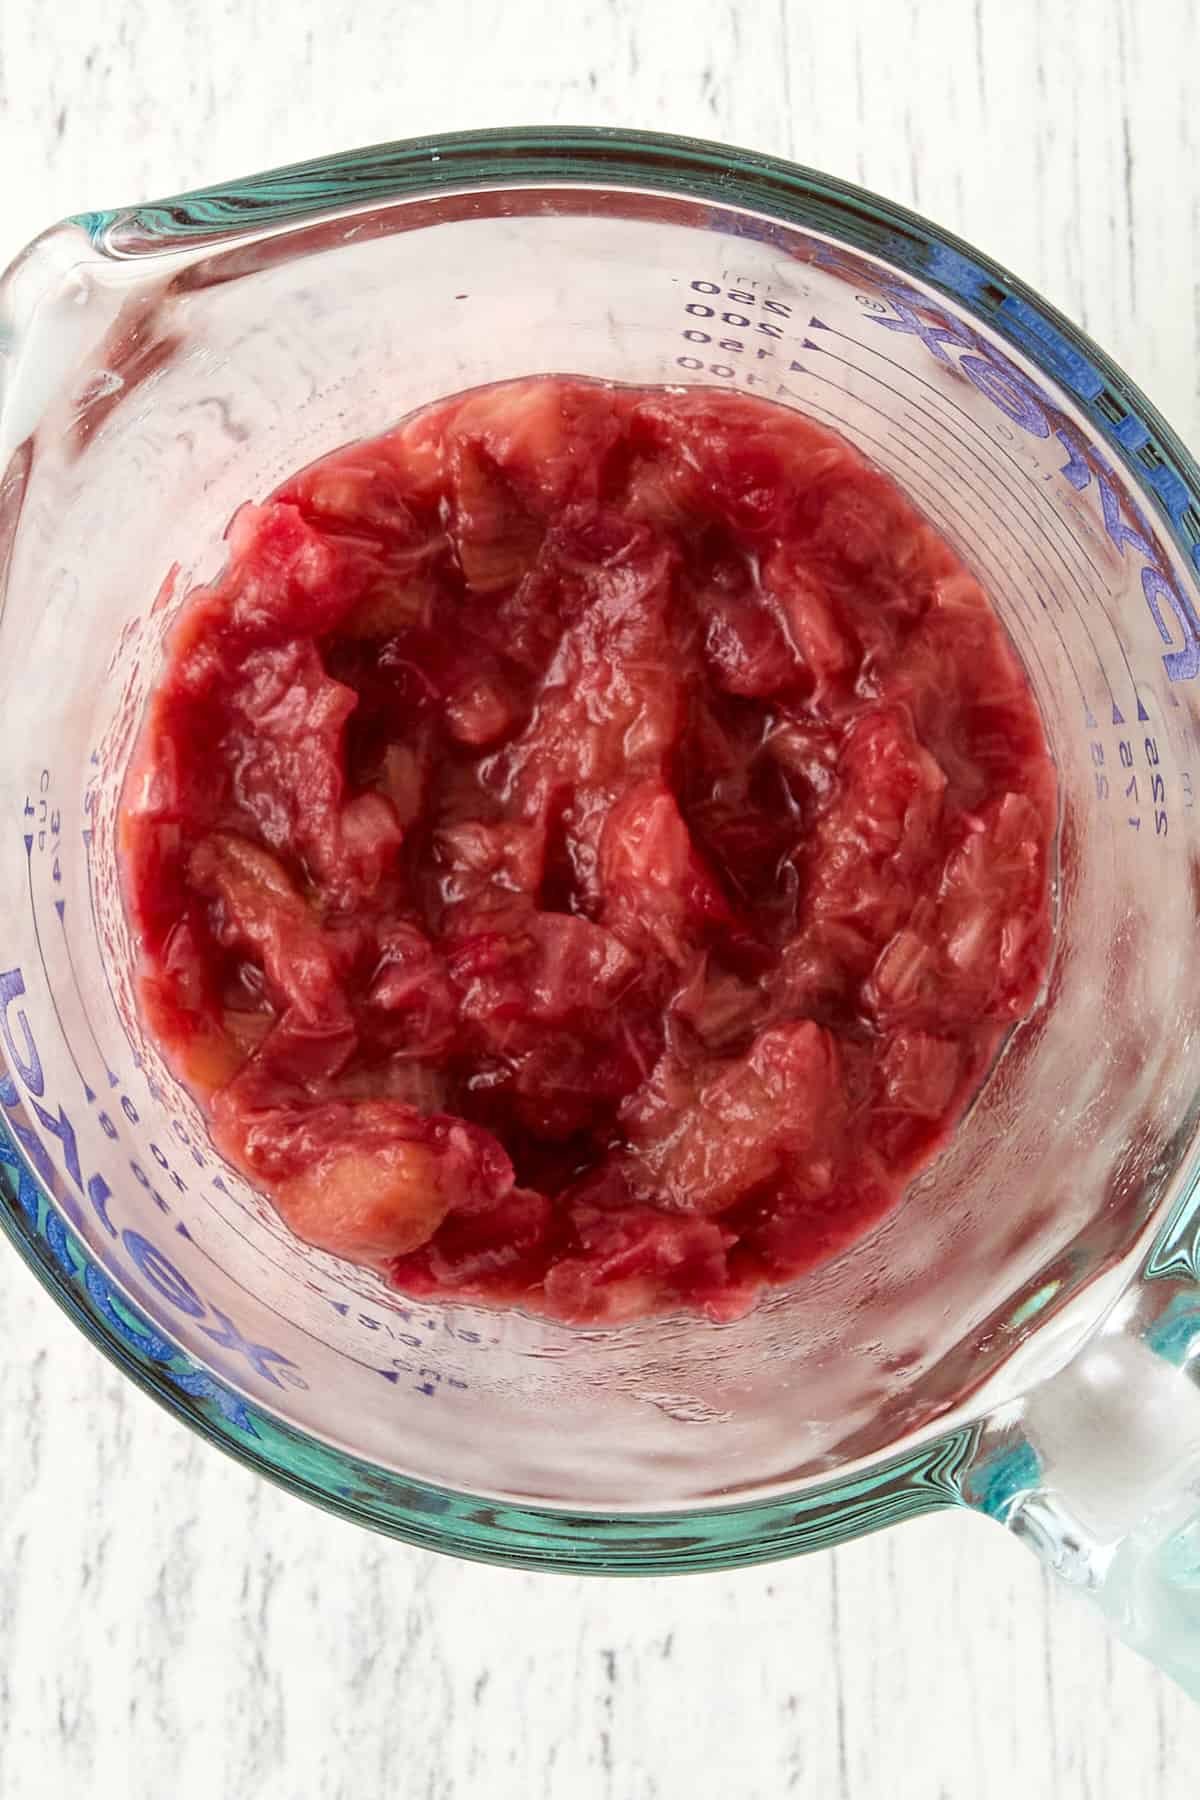 Overhead close-up picture of cooked-down rhubarb in glass measuring cup.